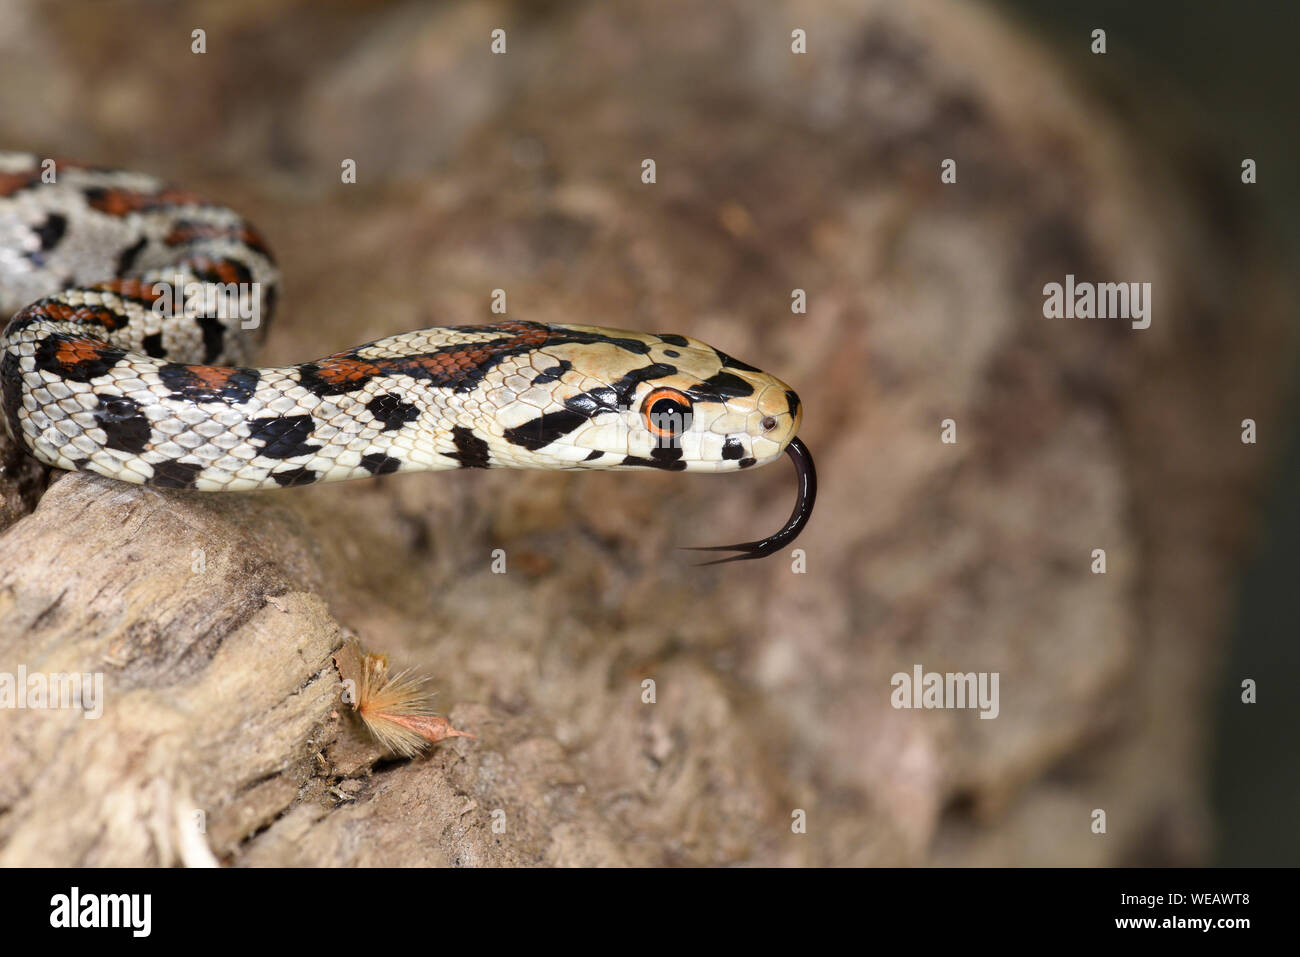 European Leopard Snake or Ratsnake (Zamenis situla) close-up of head with tongue extended, Bulgaria, April Stock Photo